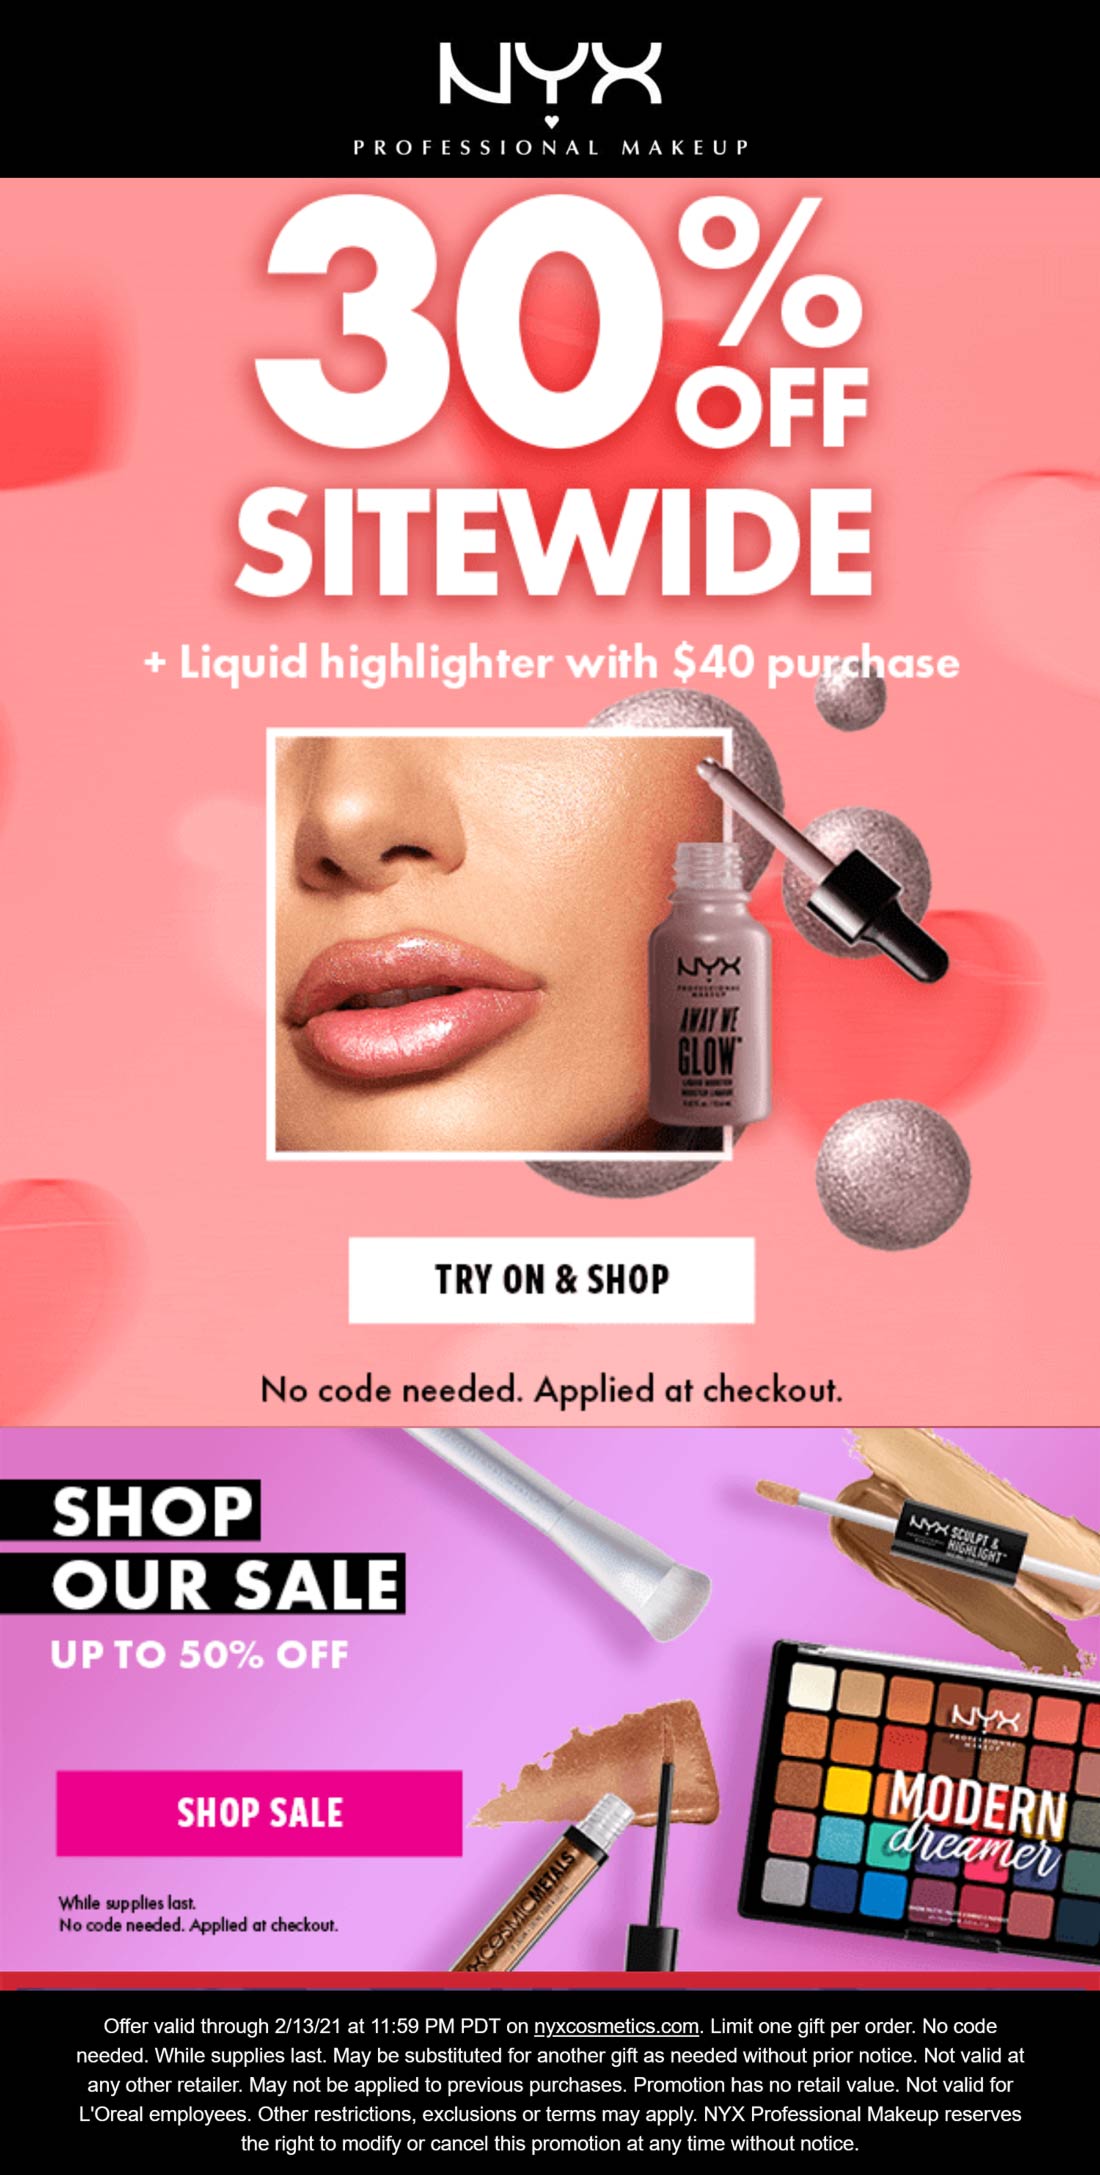 NYX Cosmetics stores Coupon  30% off everything + free liquid highlighter with $40 spent today at NYX Cosmetics #nyxcosmetics 